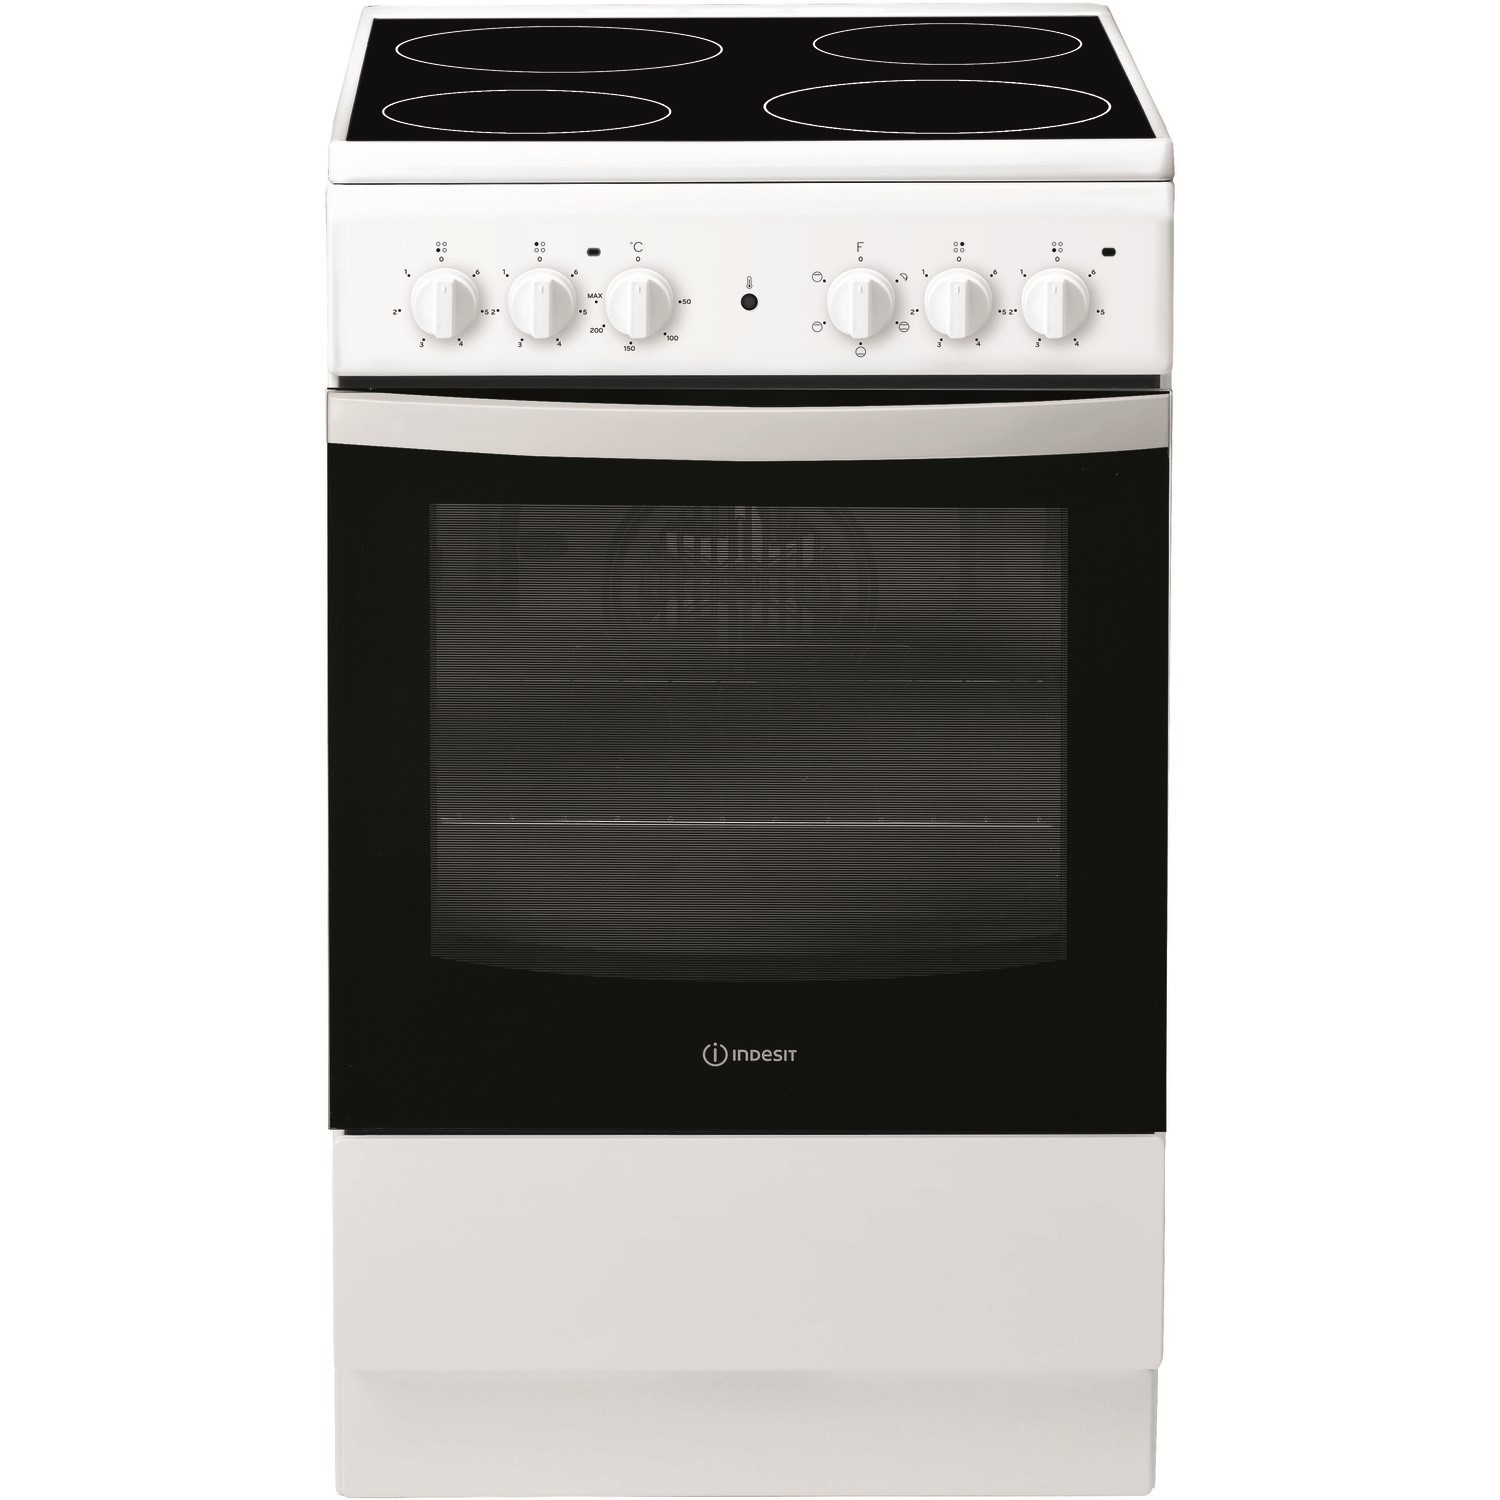 Indesit 50cm Electric Cooker with Ceramic Hob - White